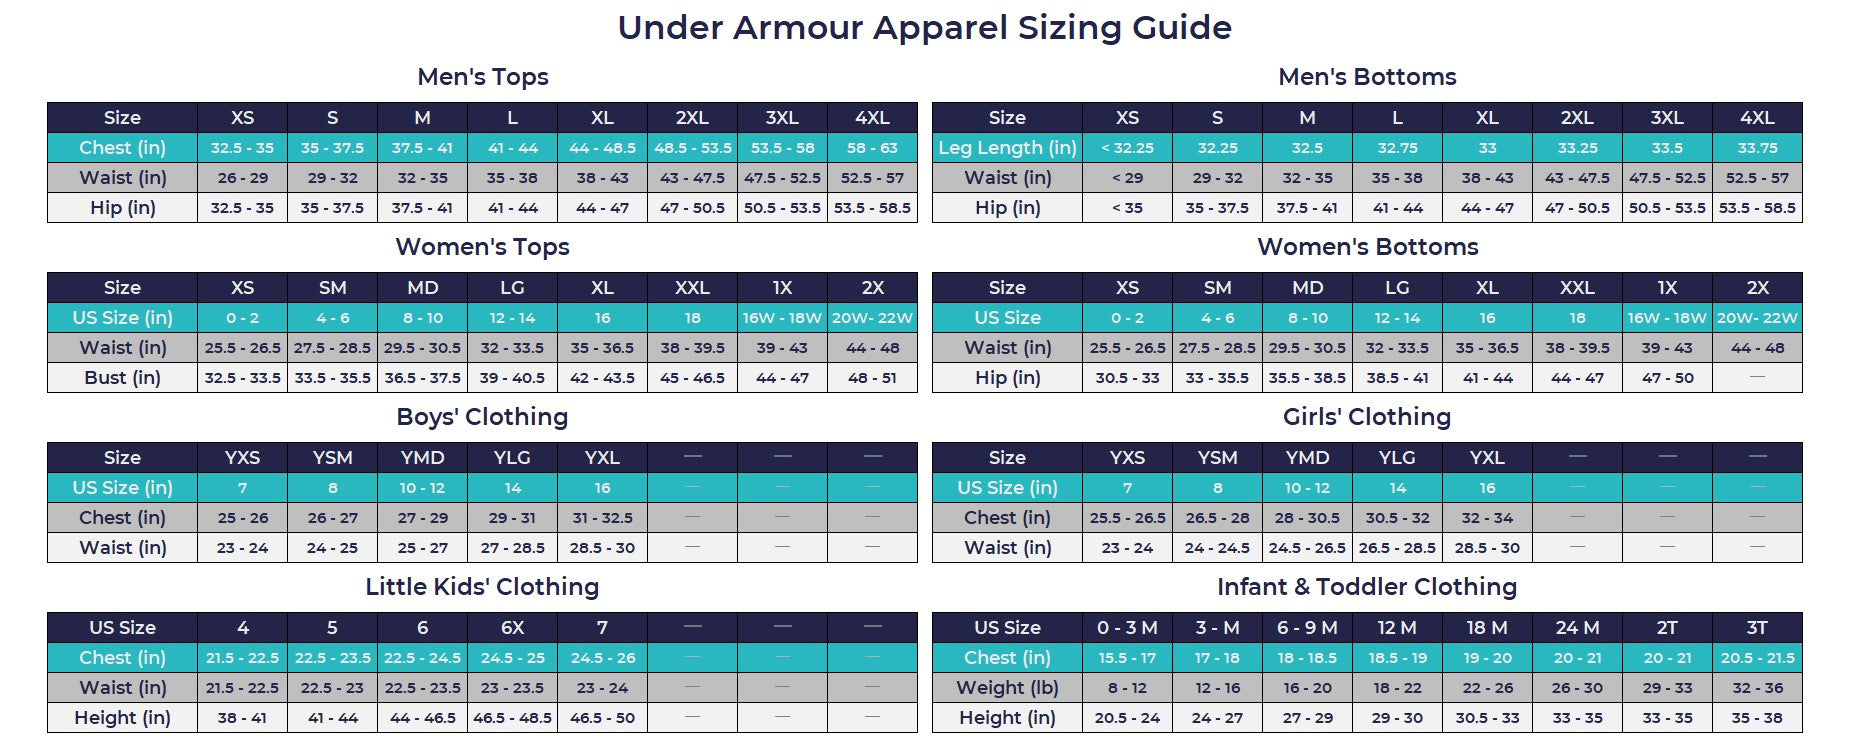 G2 Esports on X: @Umbrelink Hey there - here's the sizing chart from the  website. Hopefully it's helpful!  / X